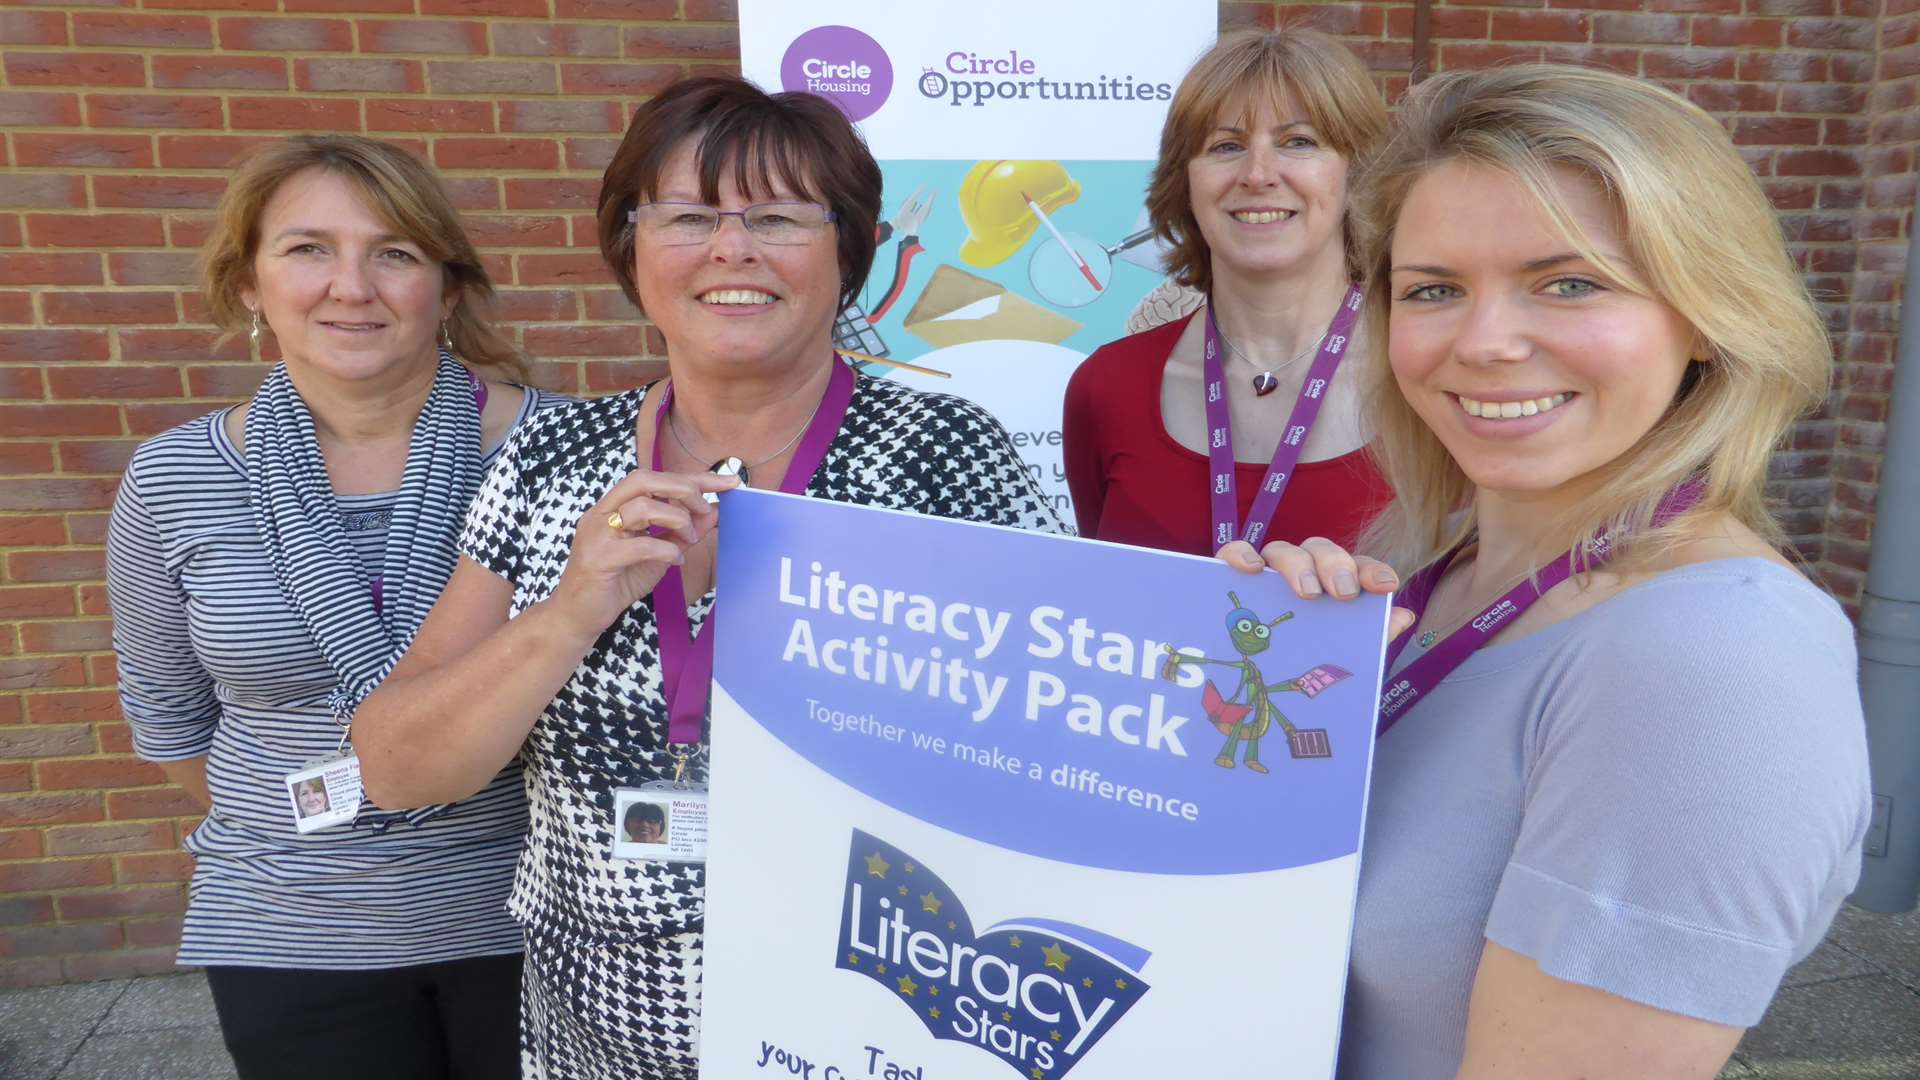 Sheena Field, Marilyn Smith, Gail Devries and Emily Foster of Circle Housing Russet celebrate the Literacy Stars launch.